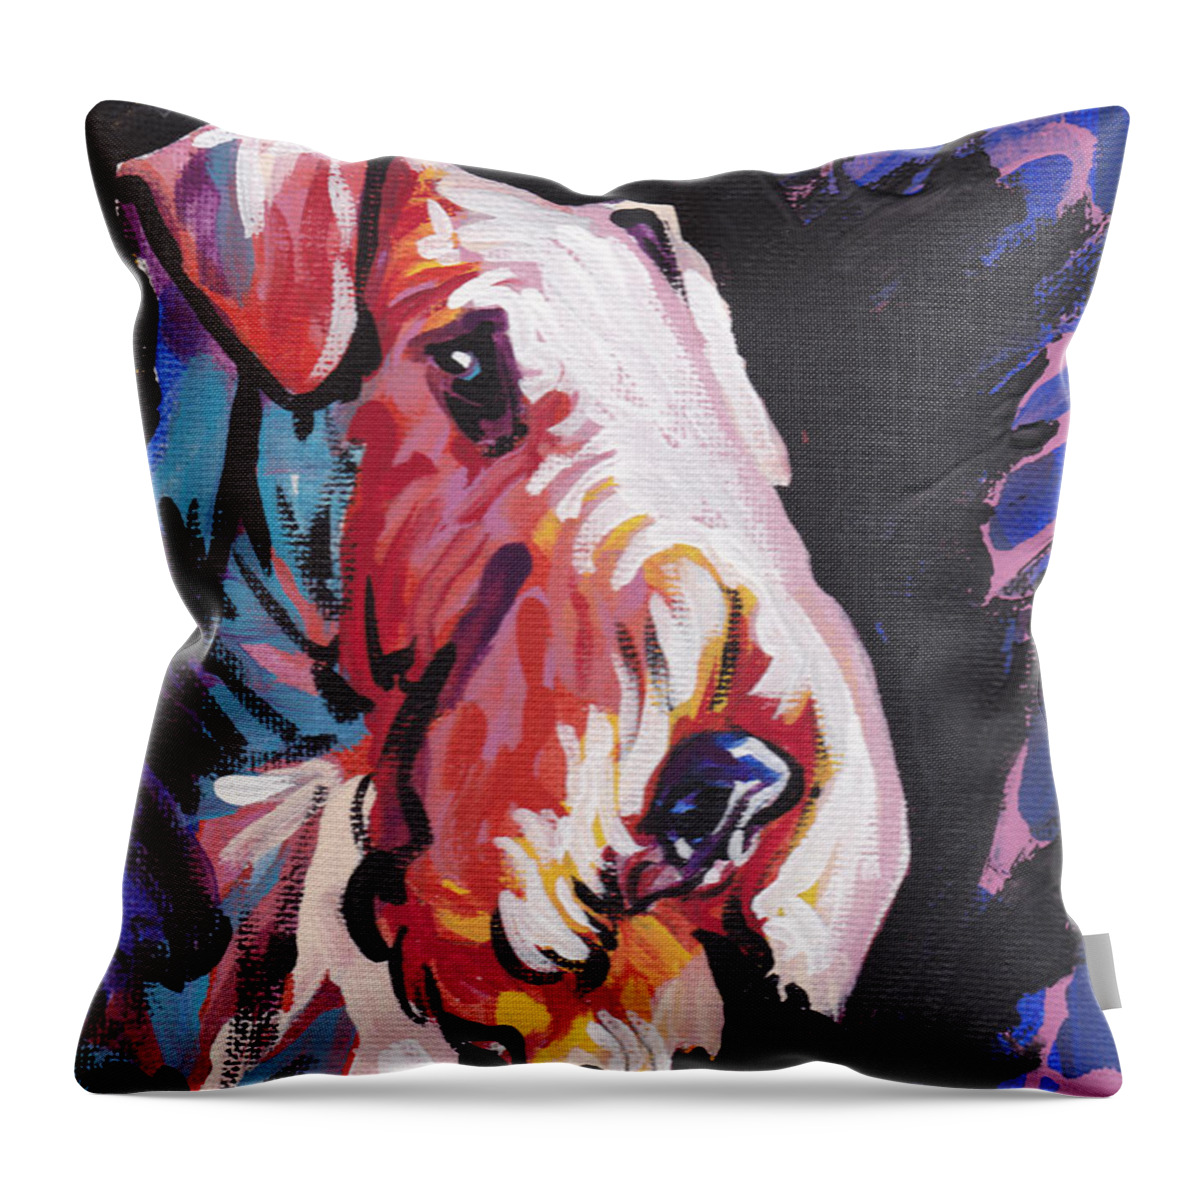 Airedale Terrier Throw Pillow featuring the painting Need Some Aire by Lea S